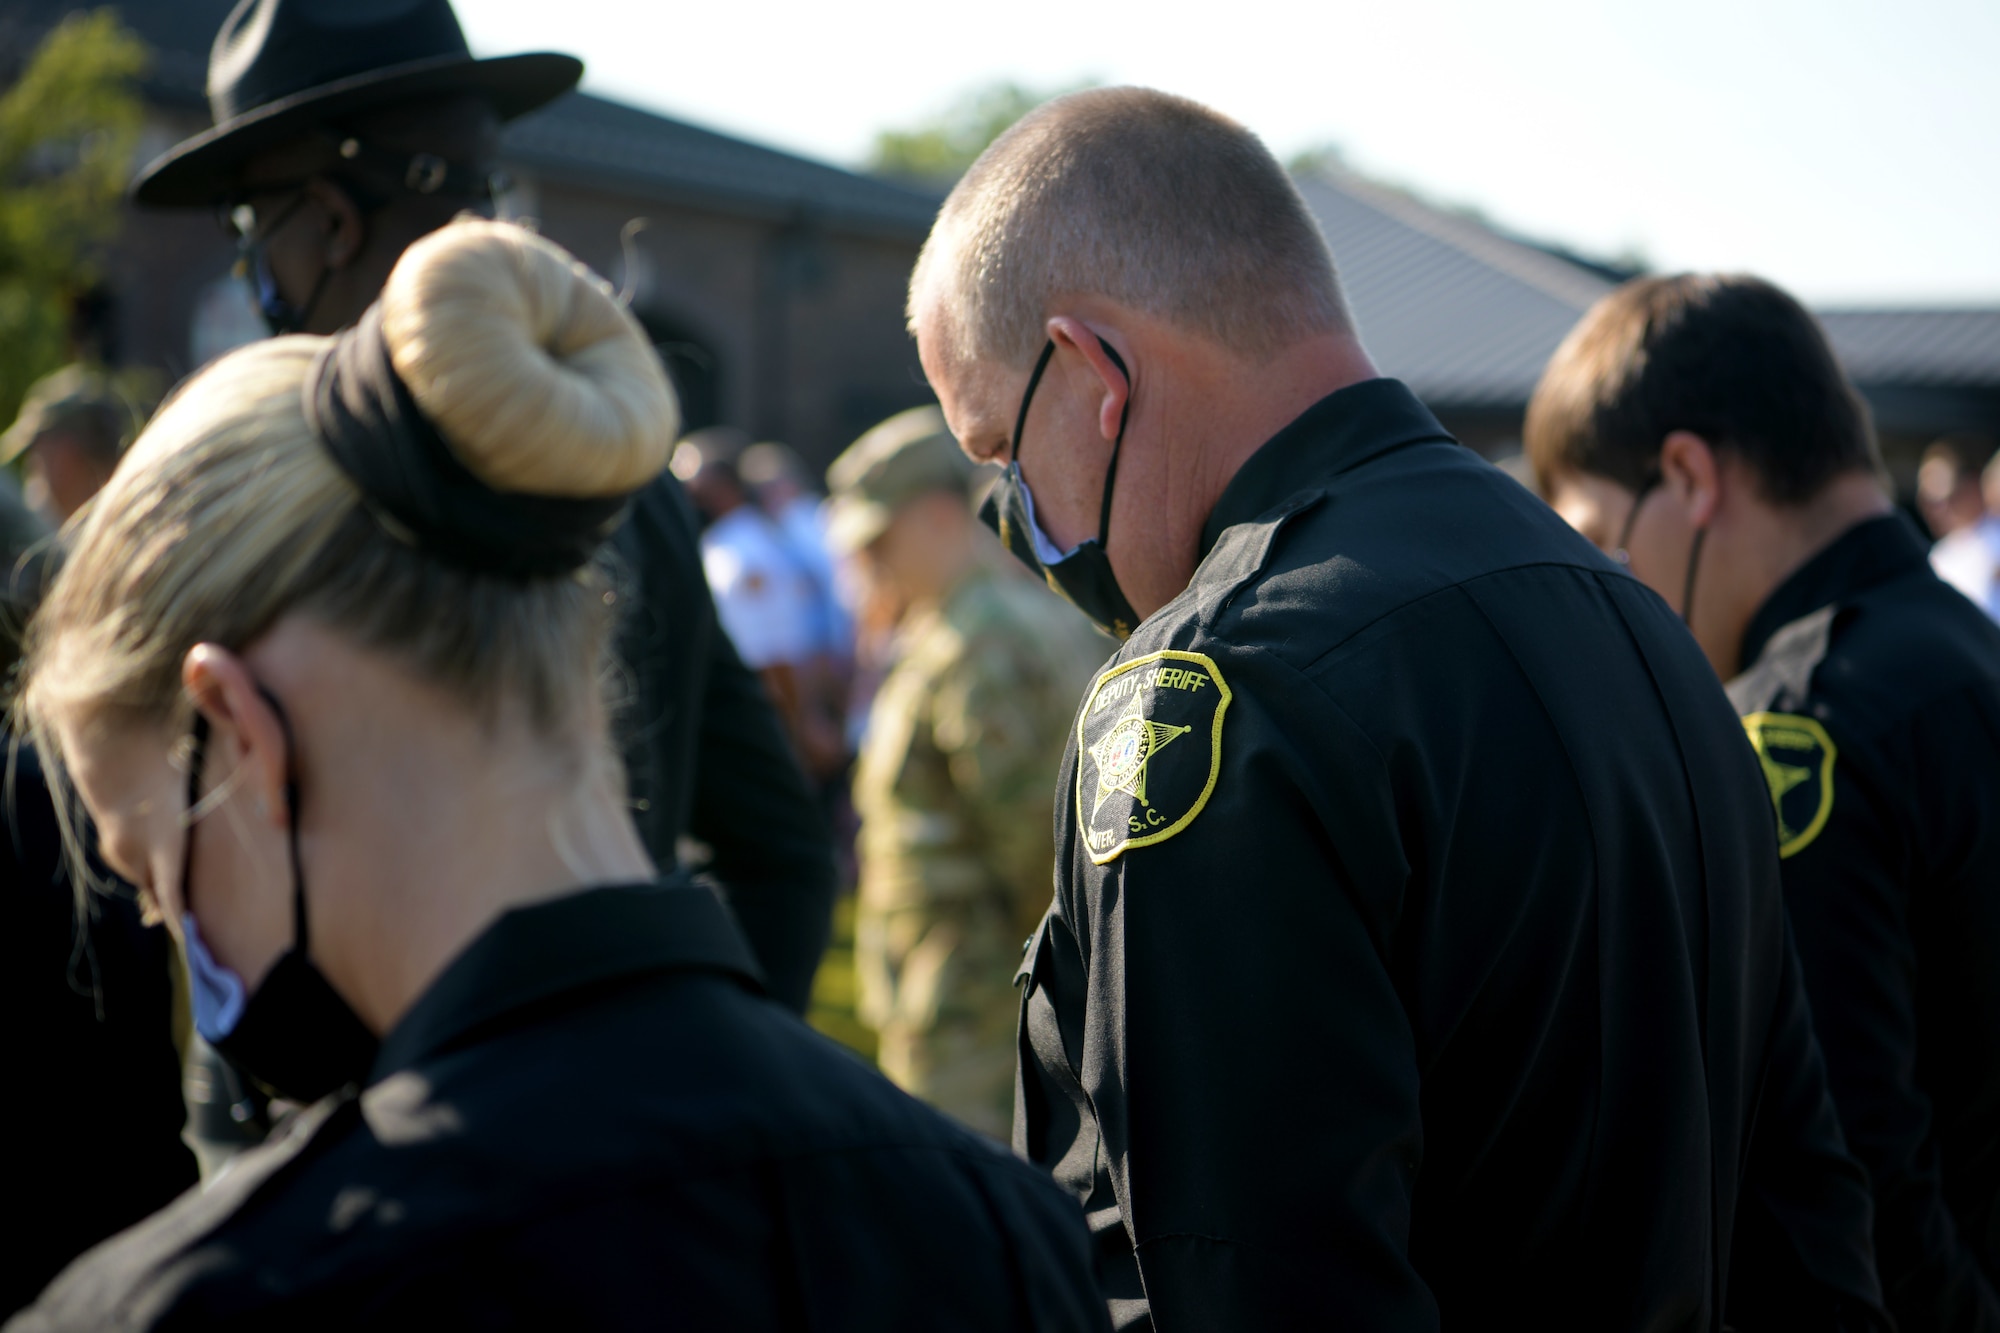 Members of the Sumter County Sheriff’s Department bow their heads for prayer during a 9/11 memorial ceremony in Sumter, S.C., Sept. 11, 2021. The ceremony was held in remembrance of the 20th anniversary of the Sept. 11, 2001, attacks across the United States. (U.S. Air Force photo by Staff Sgt. K. Tucker Owen)